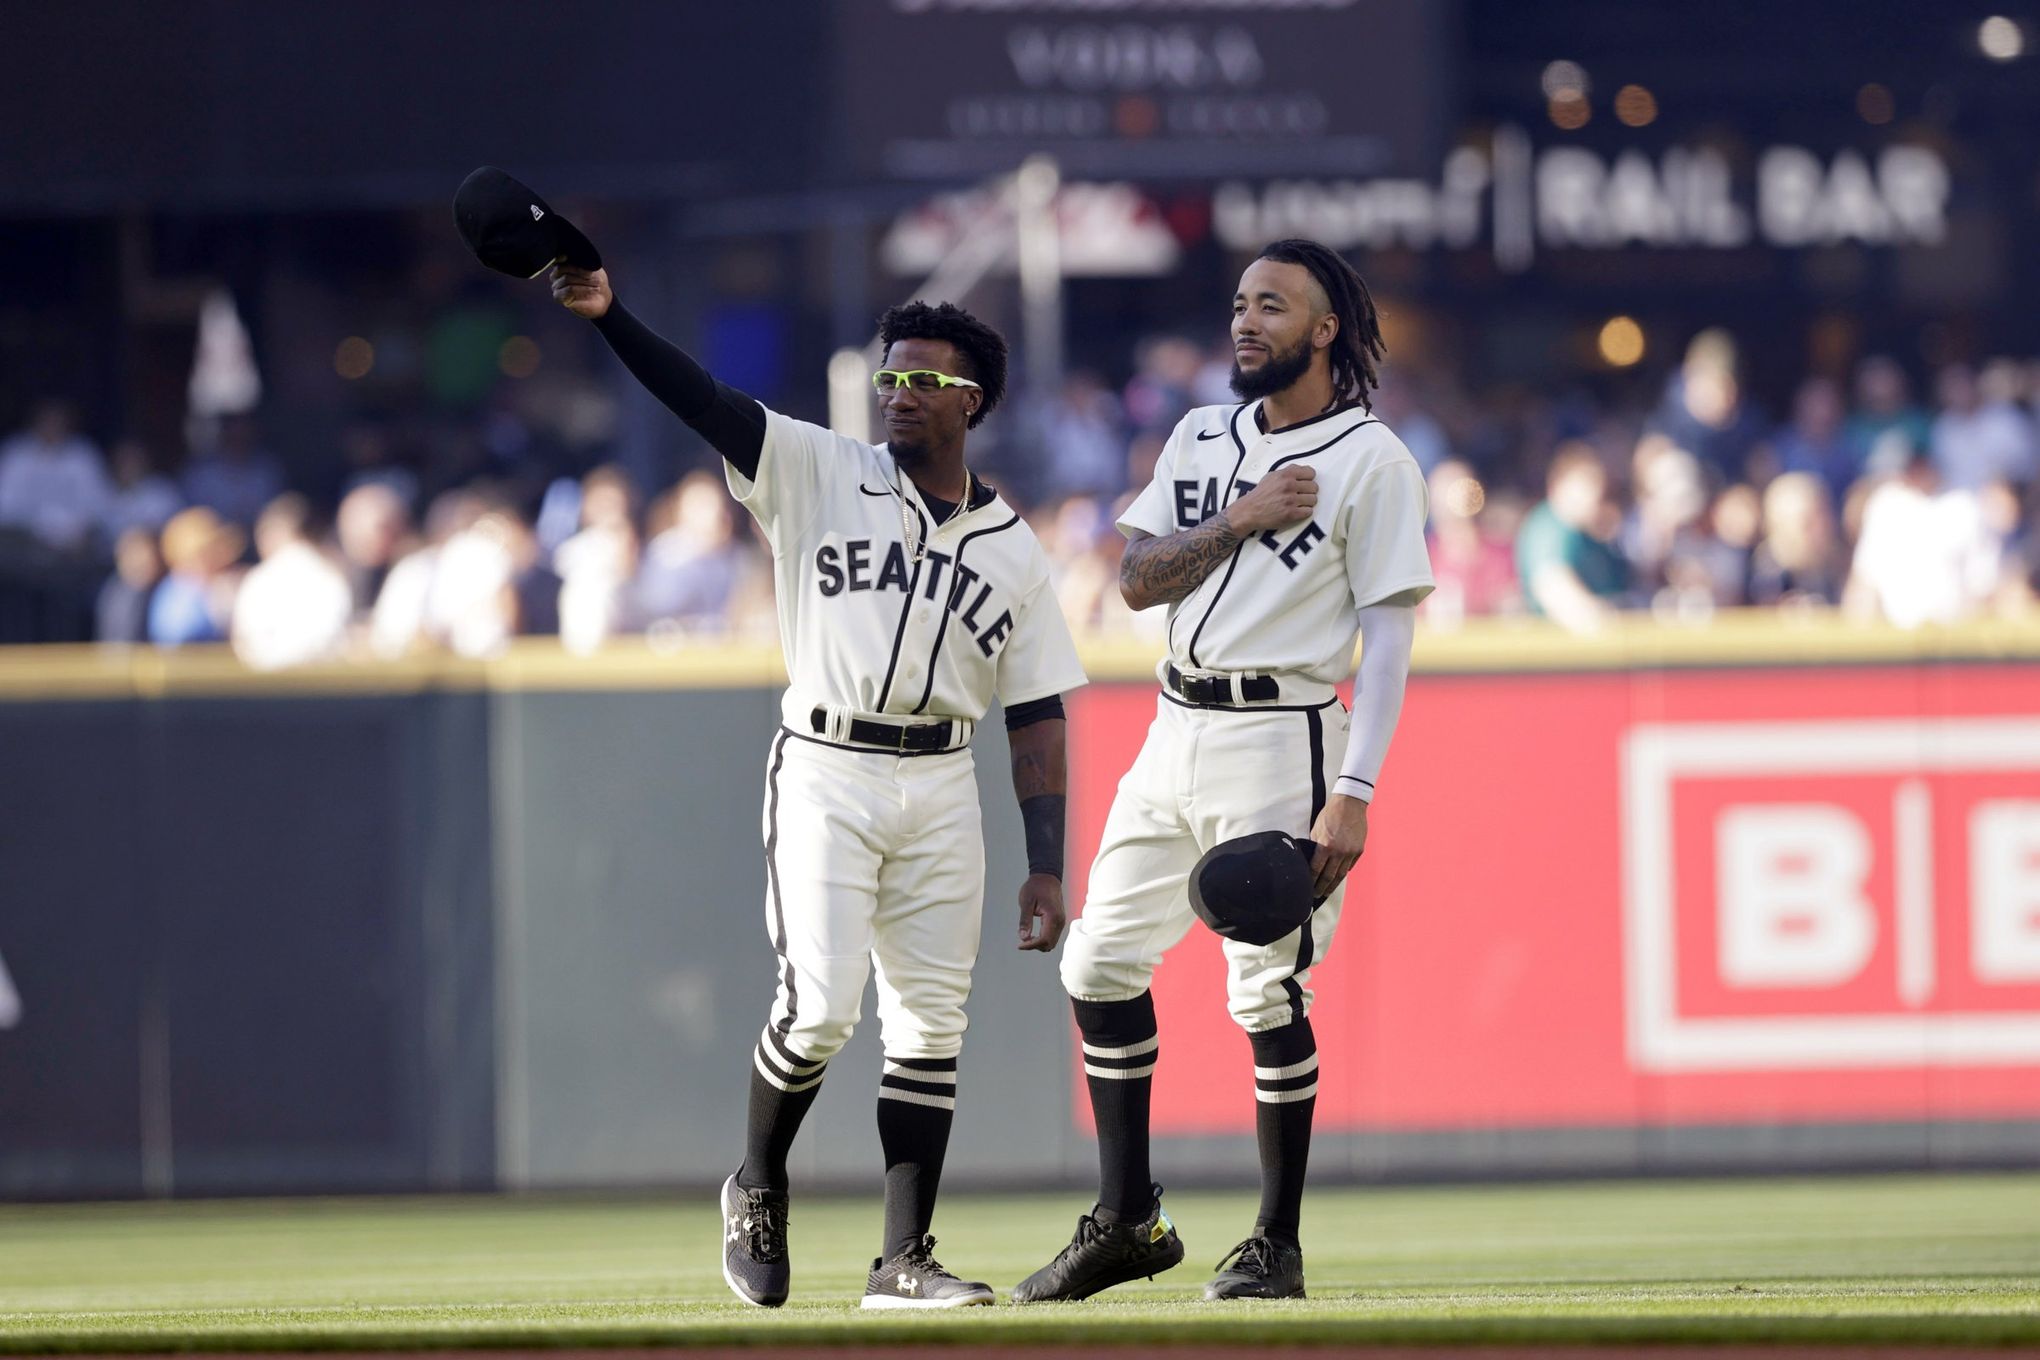 Mariners' City Connect uniforms pay tribute to Pacific Northwest